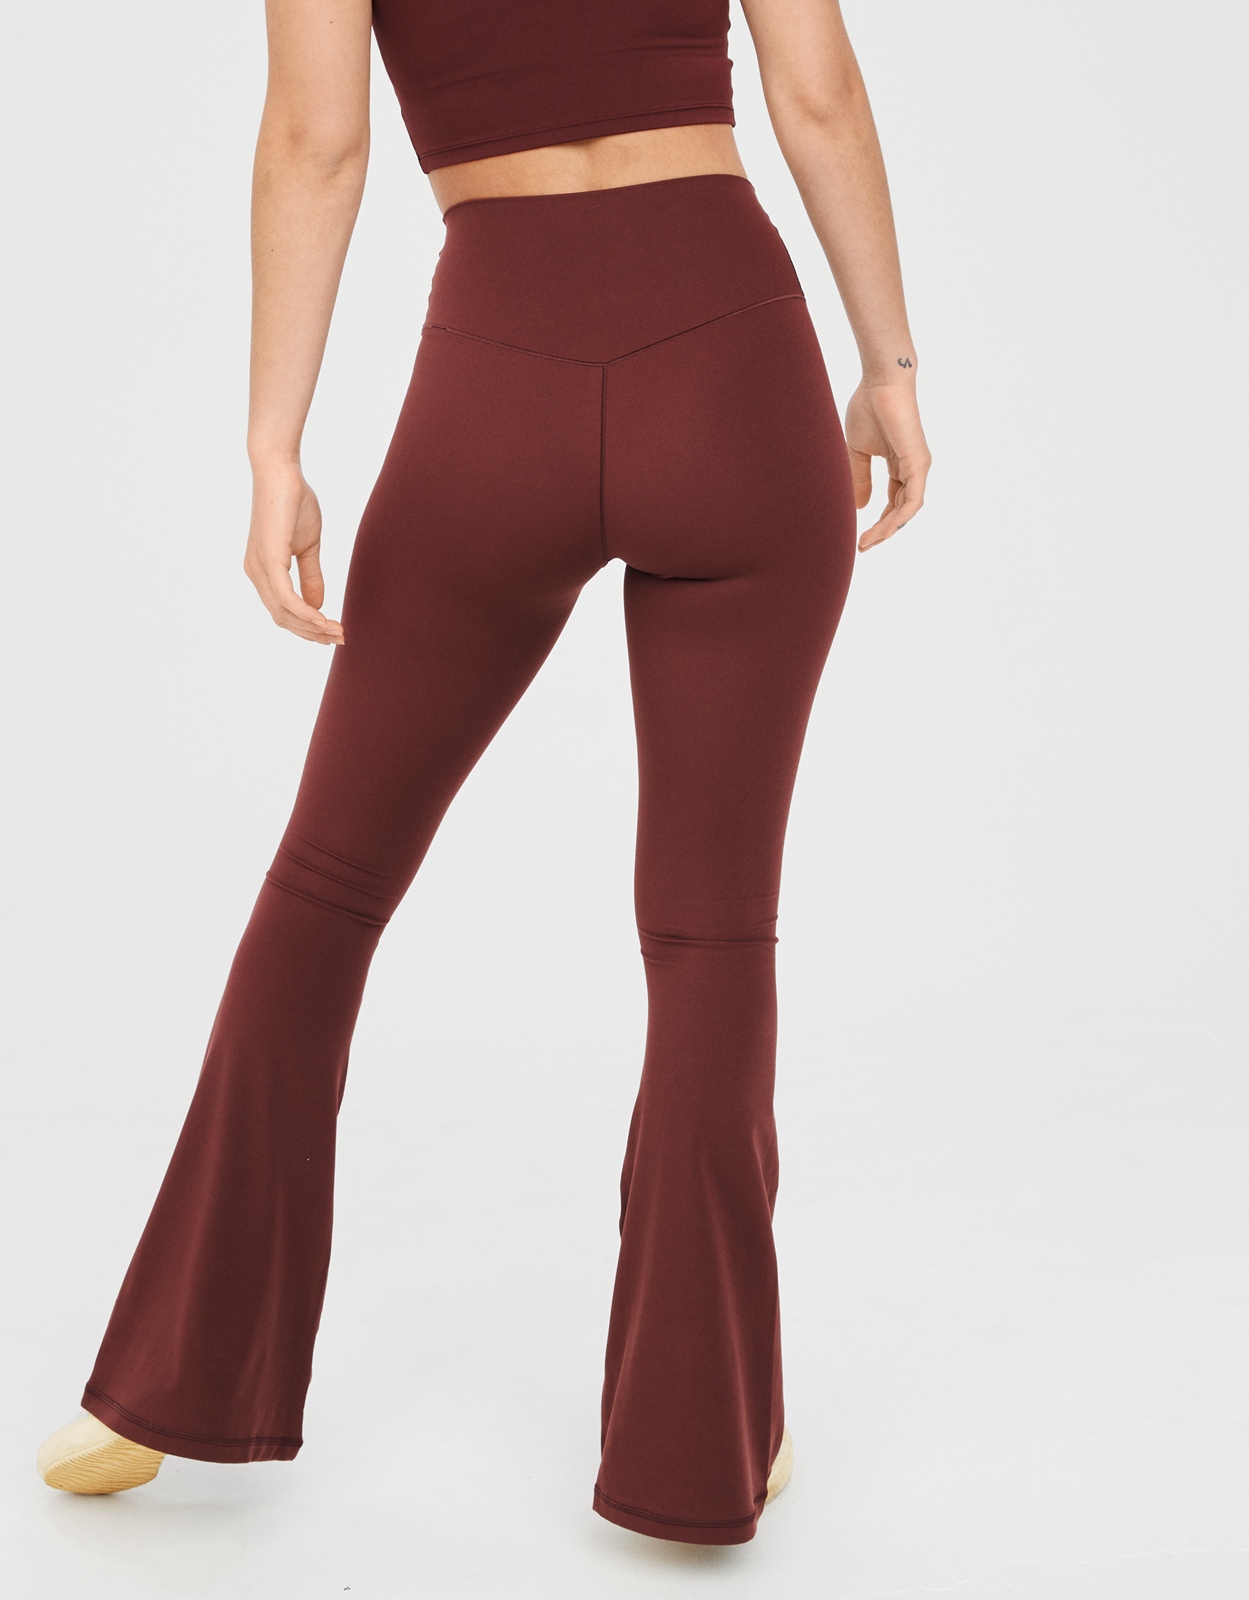 Buy OFFLINE By Aerie Real Me High Waisted Ruched Flare Legging online